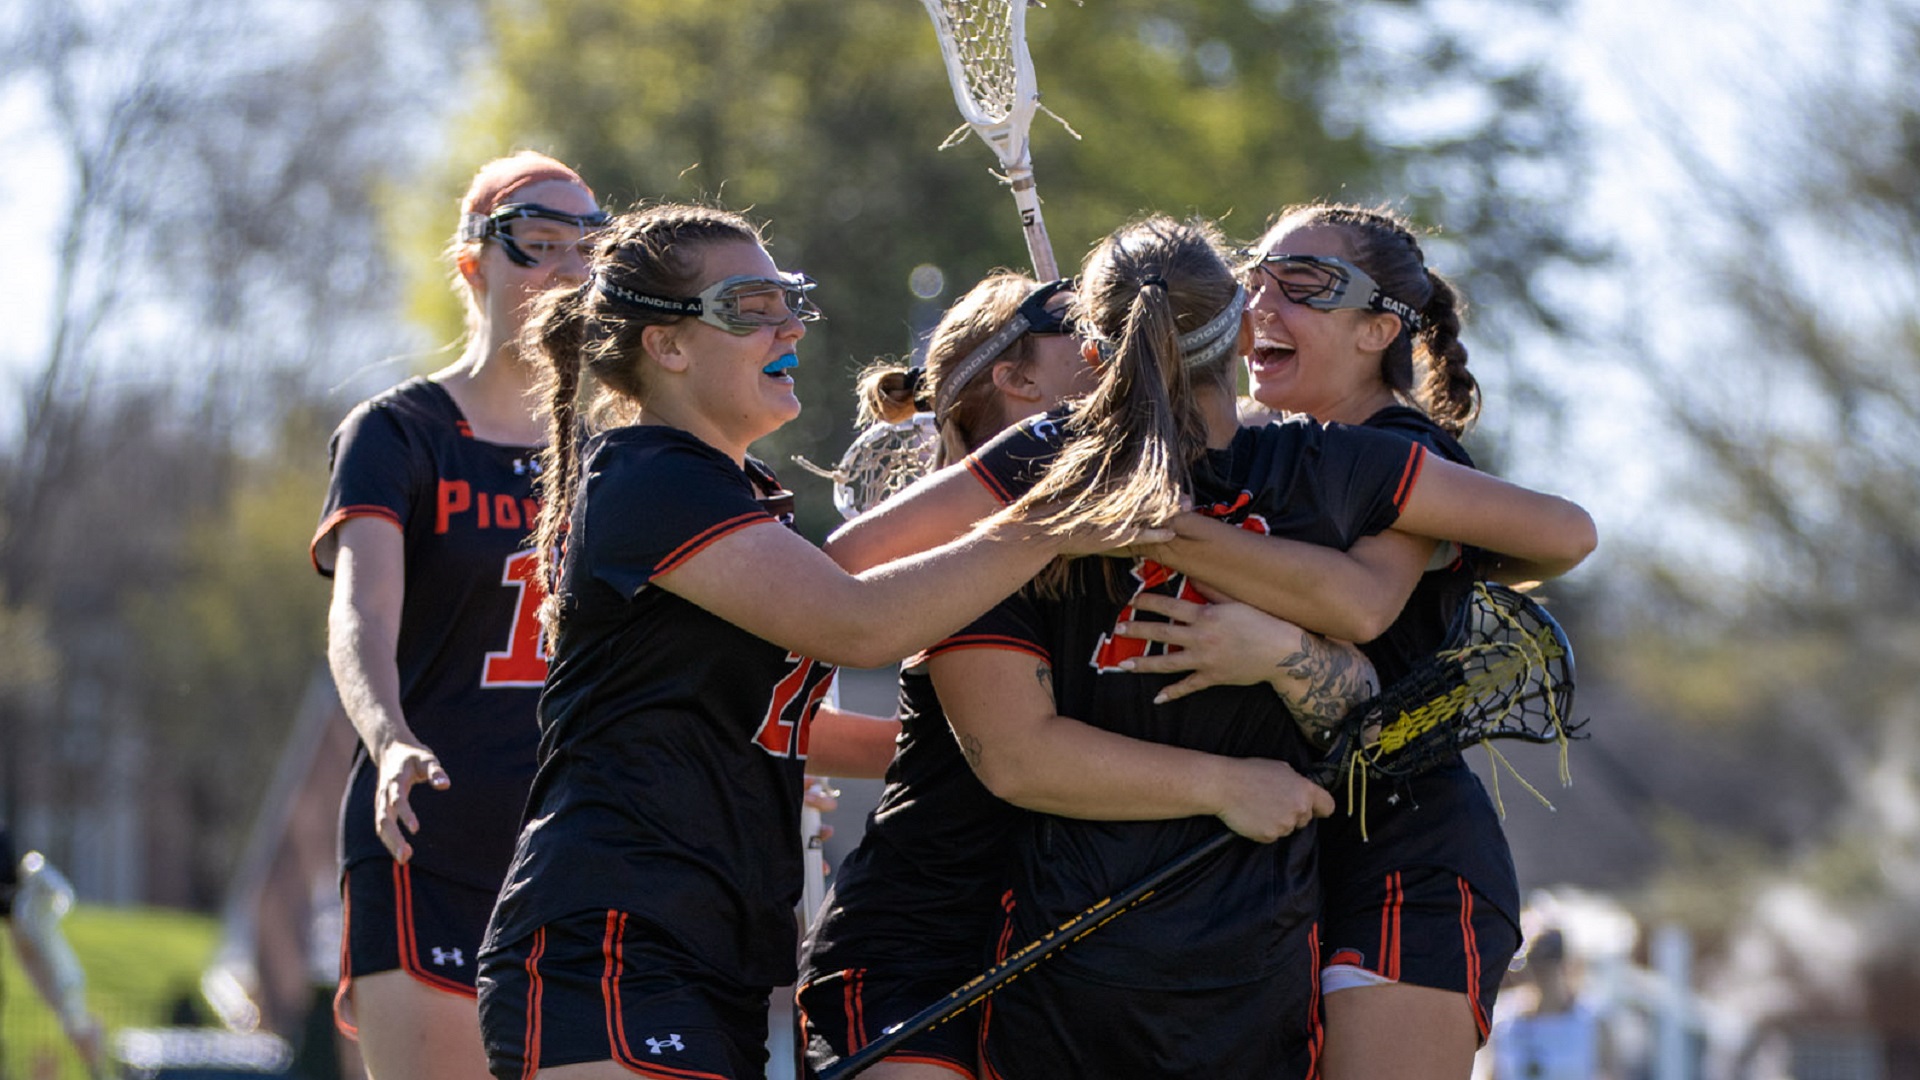 One of 24 goal celebrations by the Pioneers against Emory &amp; Henry (photo by Kari Ham)